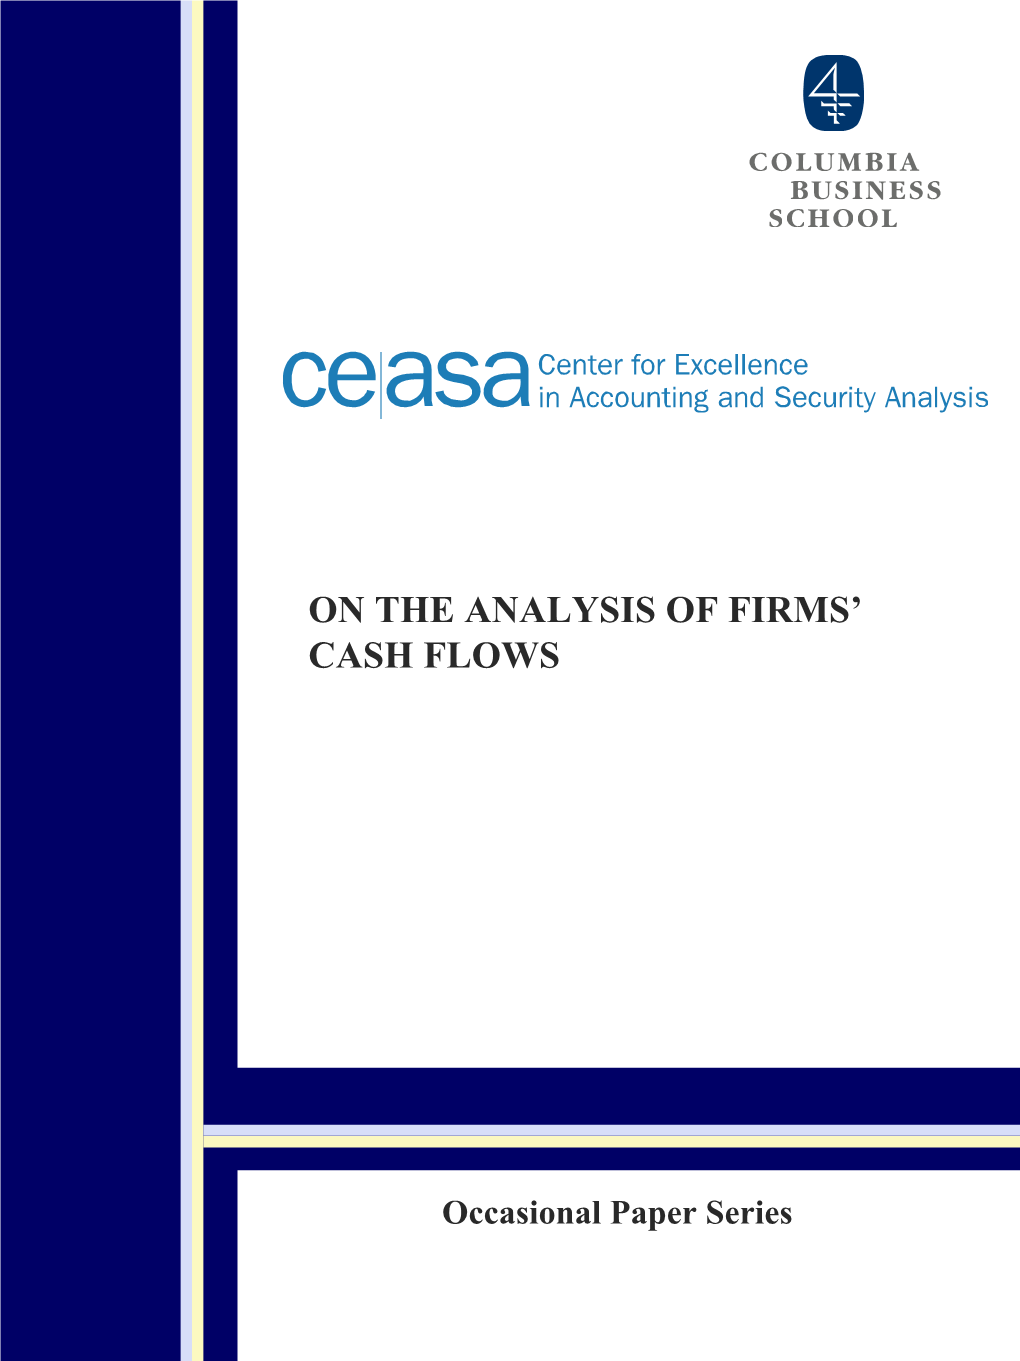 On the Analysis of Firms' Cash Flows